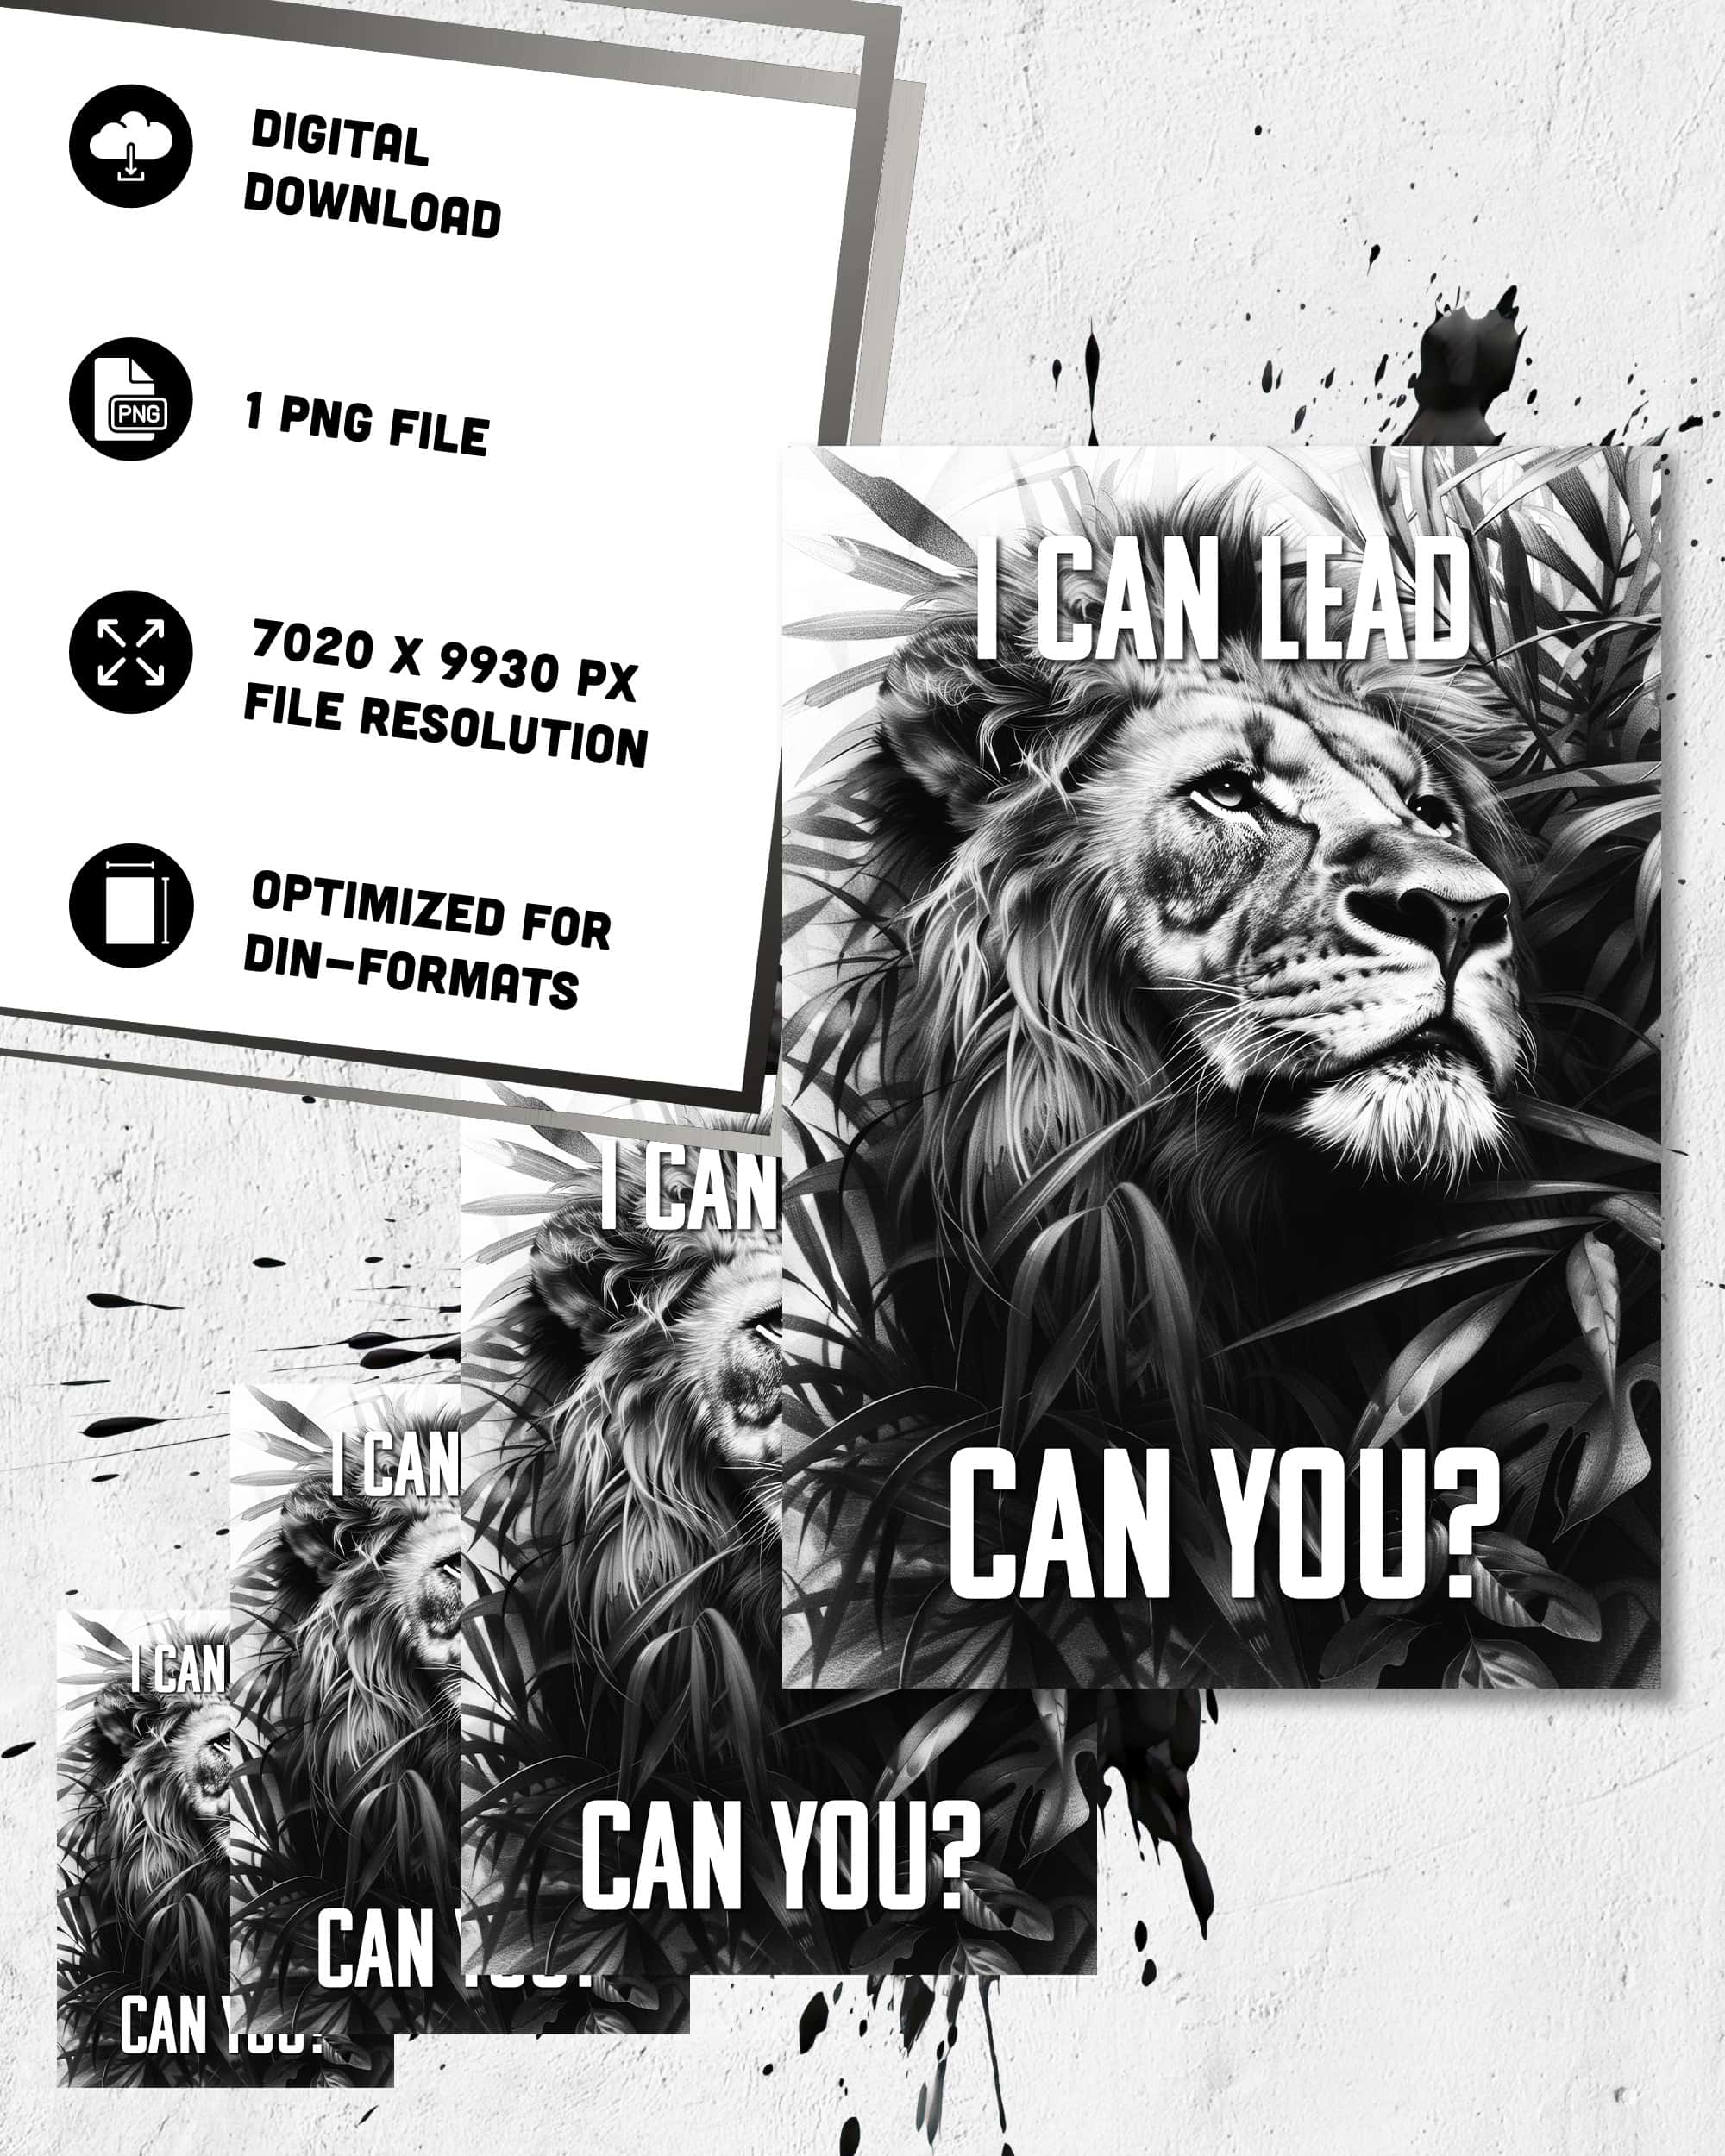 I can lead | Digital Poster